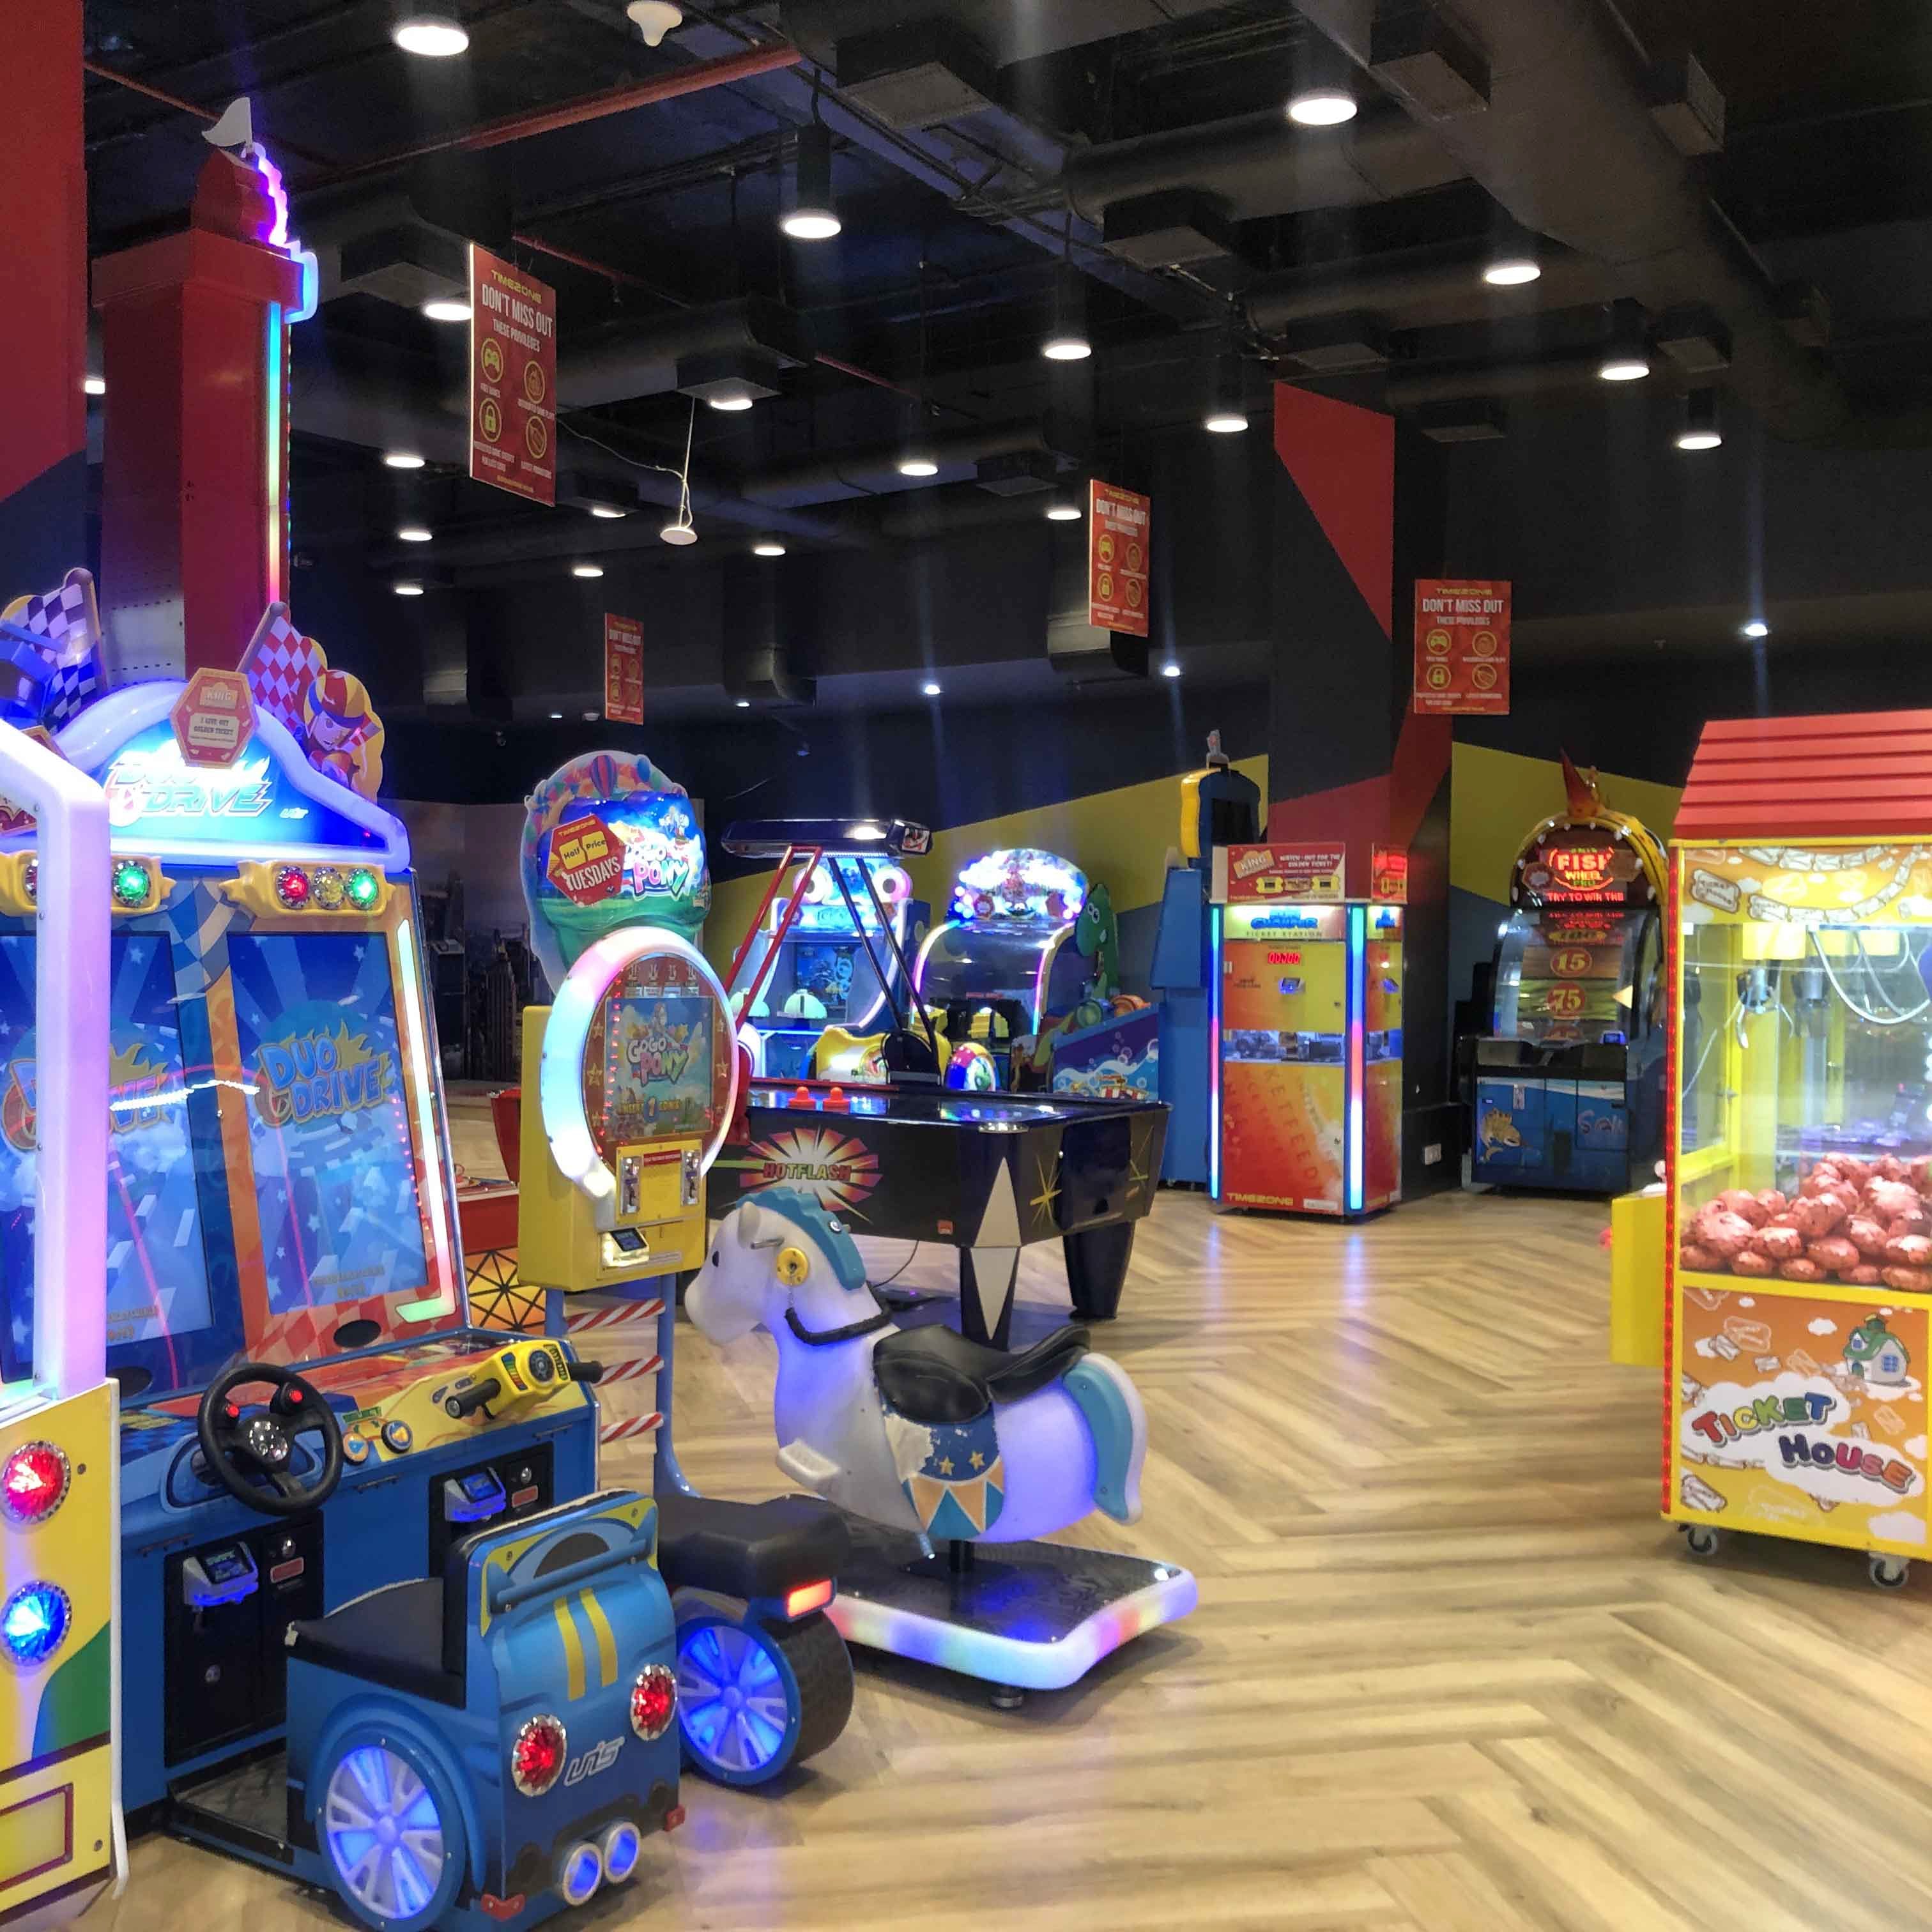 Toy,Games,Technology,Recreation,Electronic device,Playset,Recreation room,Arcade game,Machine